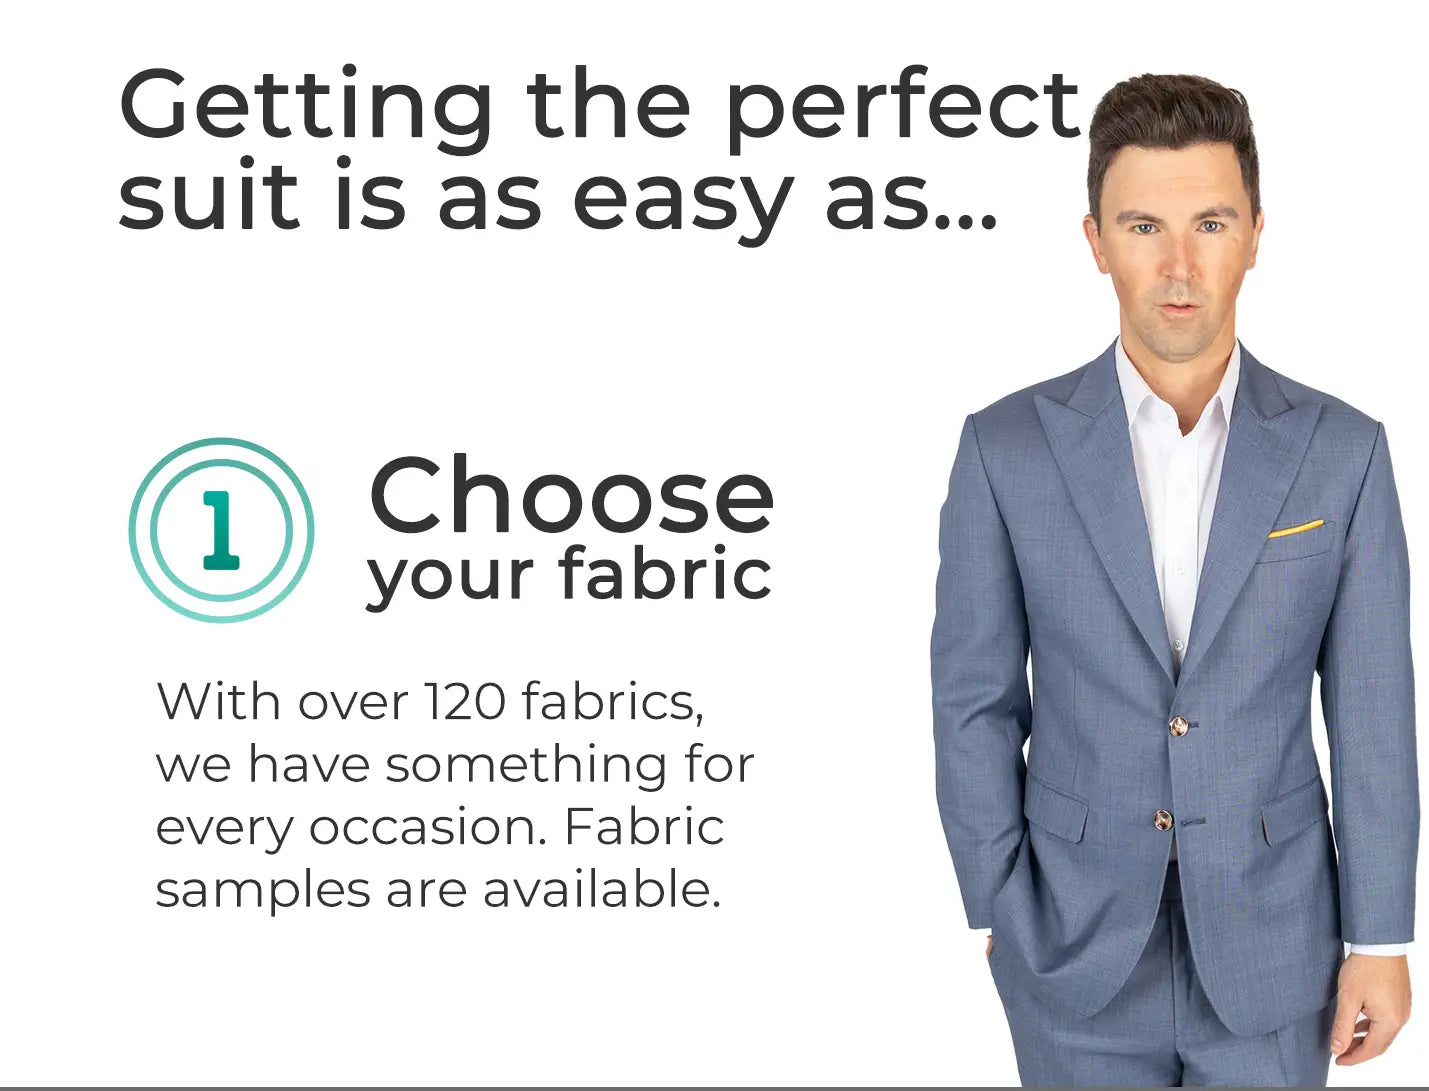 Get the perfect suit in three steps... choose your fabric. With over 120 fabrics, we have something for every occasion. Fabric samples are available. Man in suit.